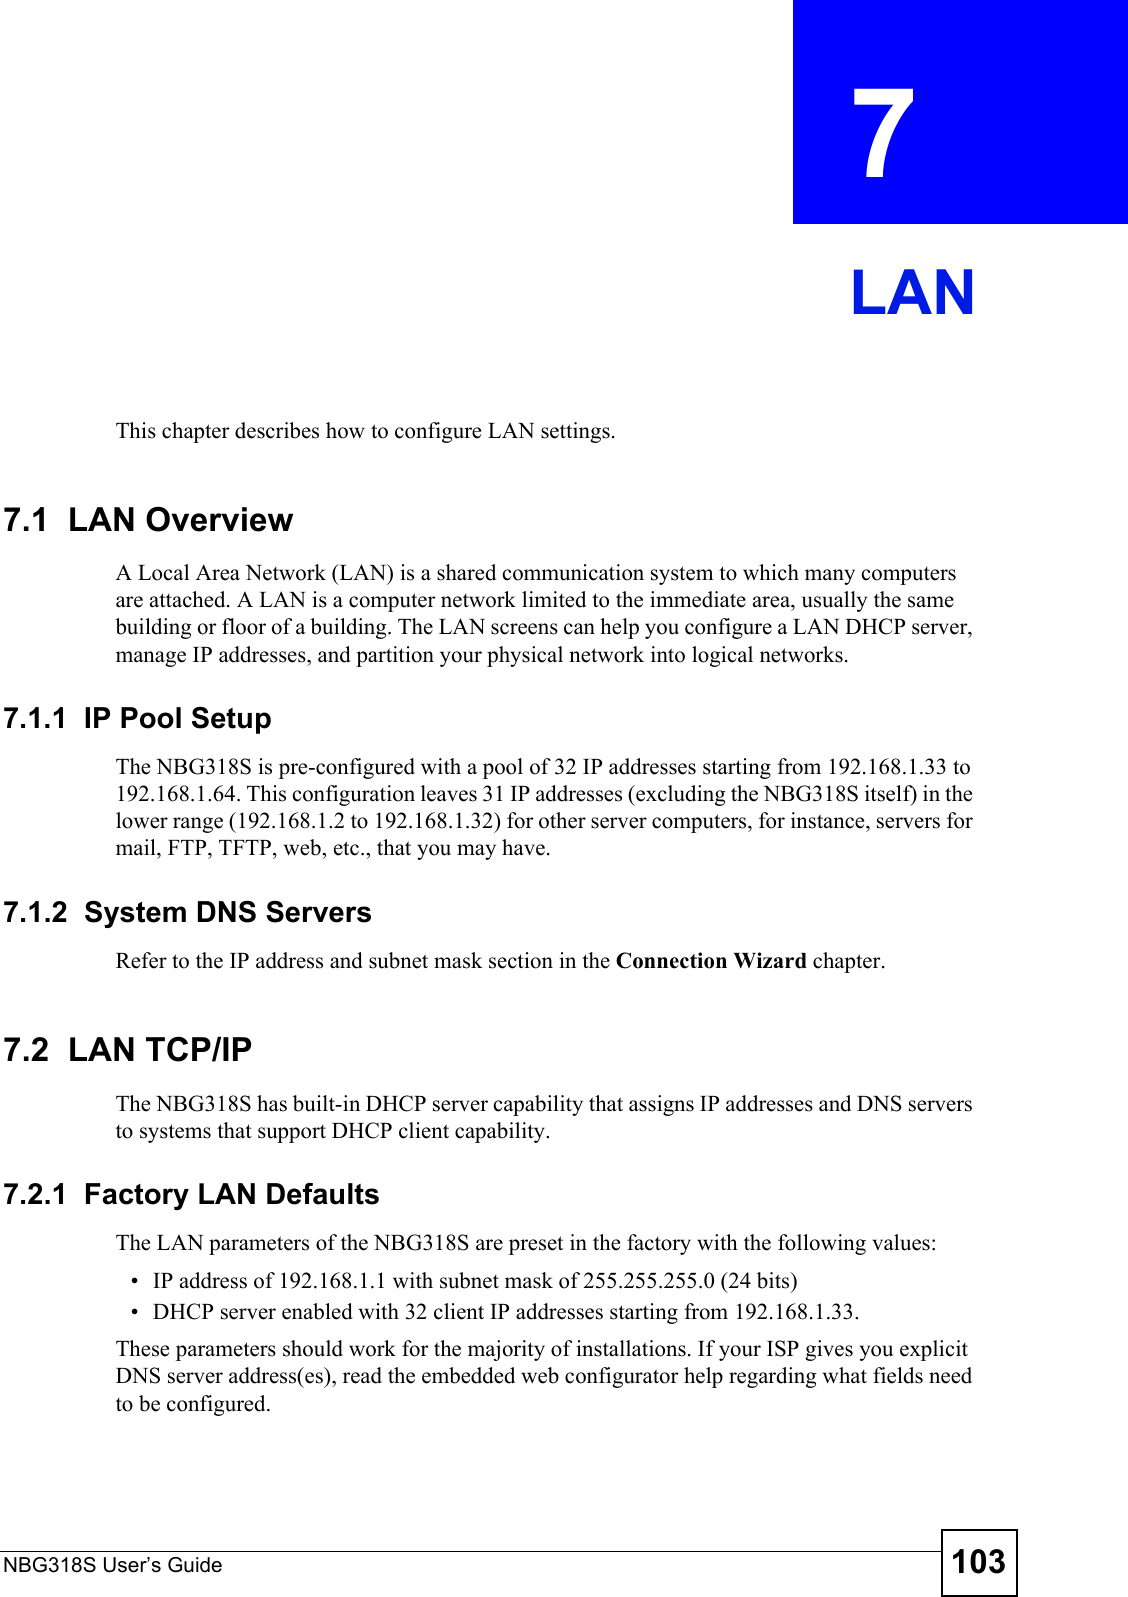 NBG318S User’s Guide 103CHAPTER  7 LANThis chapter describes how to configure LAN settings.7.1  LAN OverviewA Local Area Network (LAN) is a shared communication system to which many computers are attached. A LAN is a computer network limited to the immediate area, usually the same building or floor of a building. The LAN screens can help you configure a LAN DHCP server, manage IP addresses, and partition your physical network into logical networks.7.1.1  IP Pool SetupThe NBG318S is pre-configured with a pool of 32 IP addresses starting from 192.168.1.33 to 192.168.1.64. This configuration leaves 31 IP addresses (excluding the NBG318S itself) in the lower range (192.168.1.2 to 192.168.1.32) for other server computers, for instance, servers for mail, FTP, TFTP, web, etc., that you may have.7.1.2  System DNS ServersRefer to the IP address and subnet mask section in the Connection Wizard chapter.7.2  LAN TCP/IP The NBG318S has built-in DHCP server capability that assigns IP addresses and DNS servers to systems that support DHCP client capability.7.2.1  Factory LAN DefaultsThe LAN parameters of the NBG318S are preset in the factory with the following values:• IP address of 192.168.1.1 with subnet mask of 255.255.255.0 (24 bits)• DHCP server enabled with 32 client IP addresses starting from 192.168.1.33. These parameters should work for the majority of installations. If your ISP gives you explicit DNS server address(es), read the embedded web configurator help regarding what fields need to be configured.